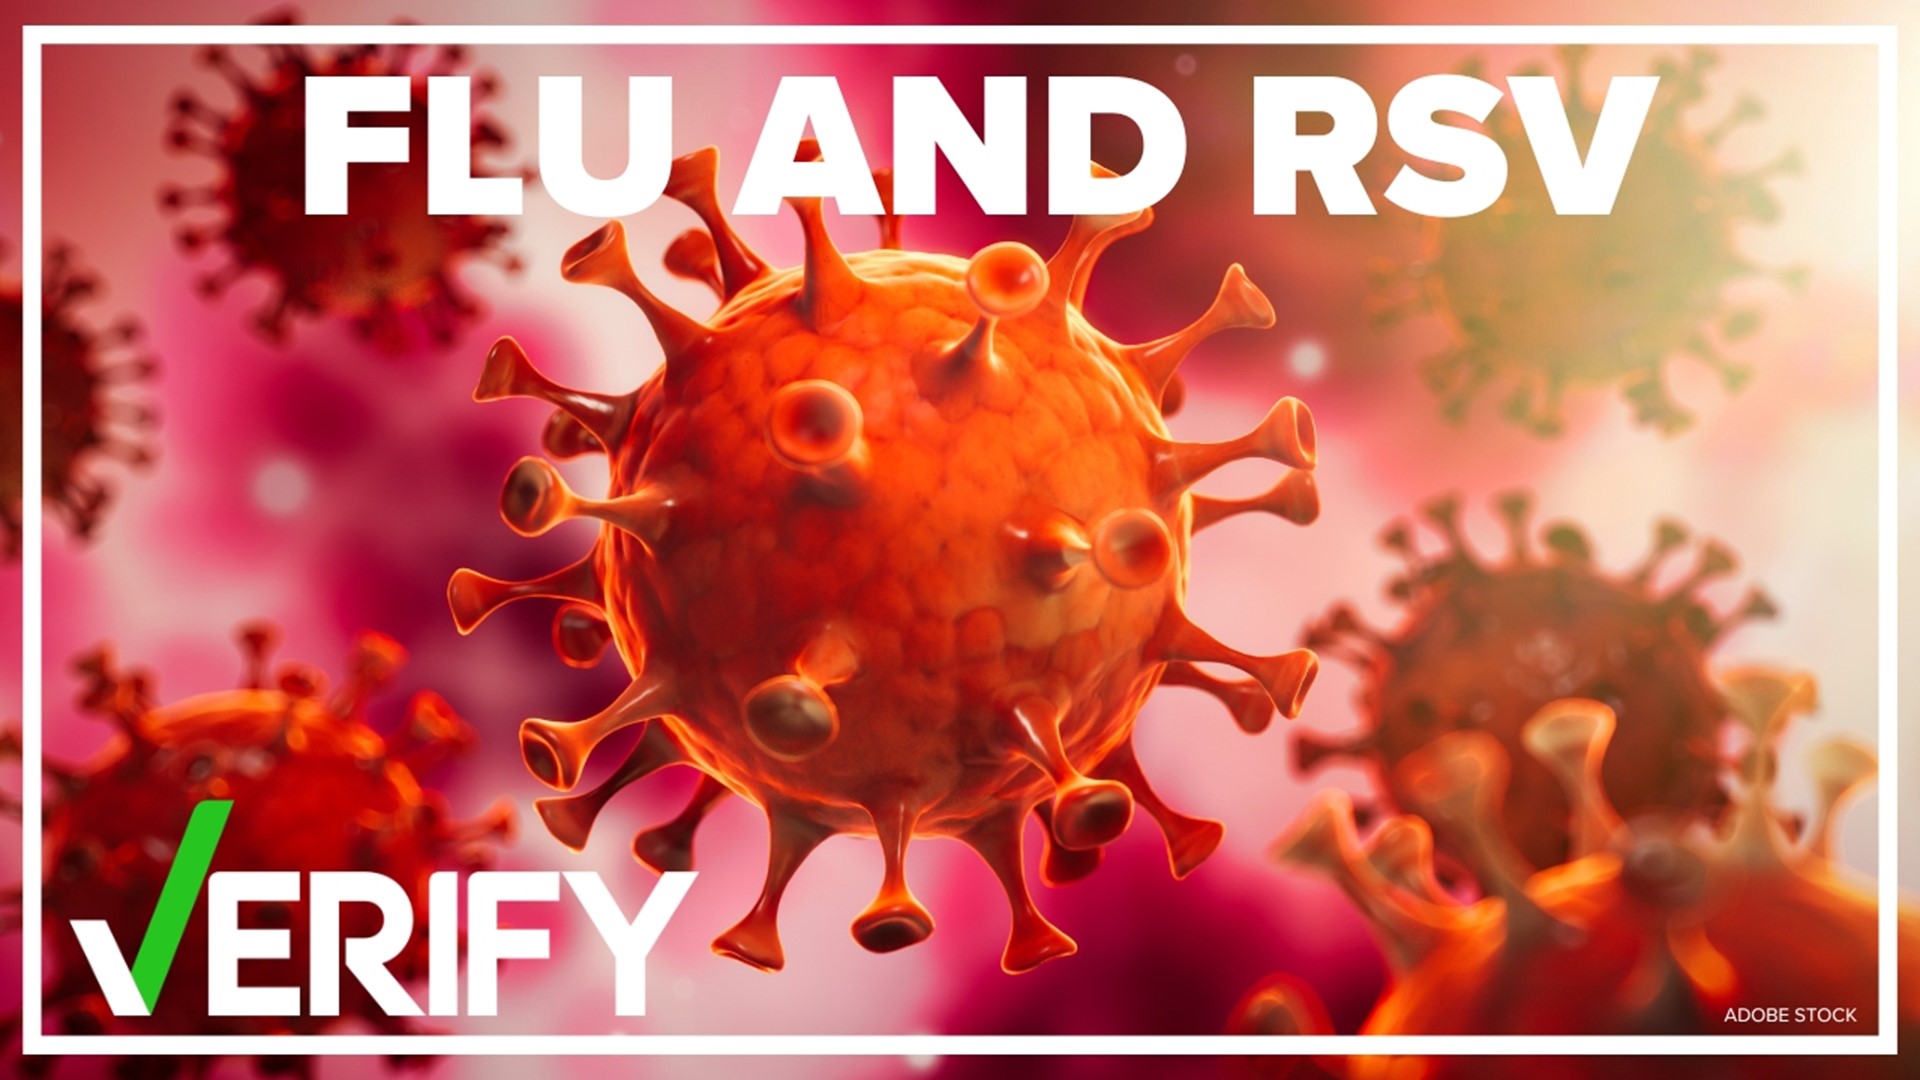 With concerns over rising flu and RSV cases, some online say the two viruses have merged, but the claims need context.